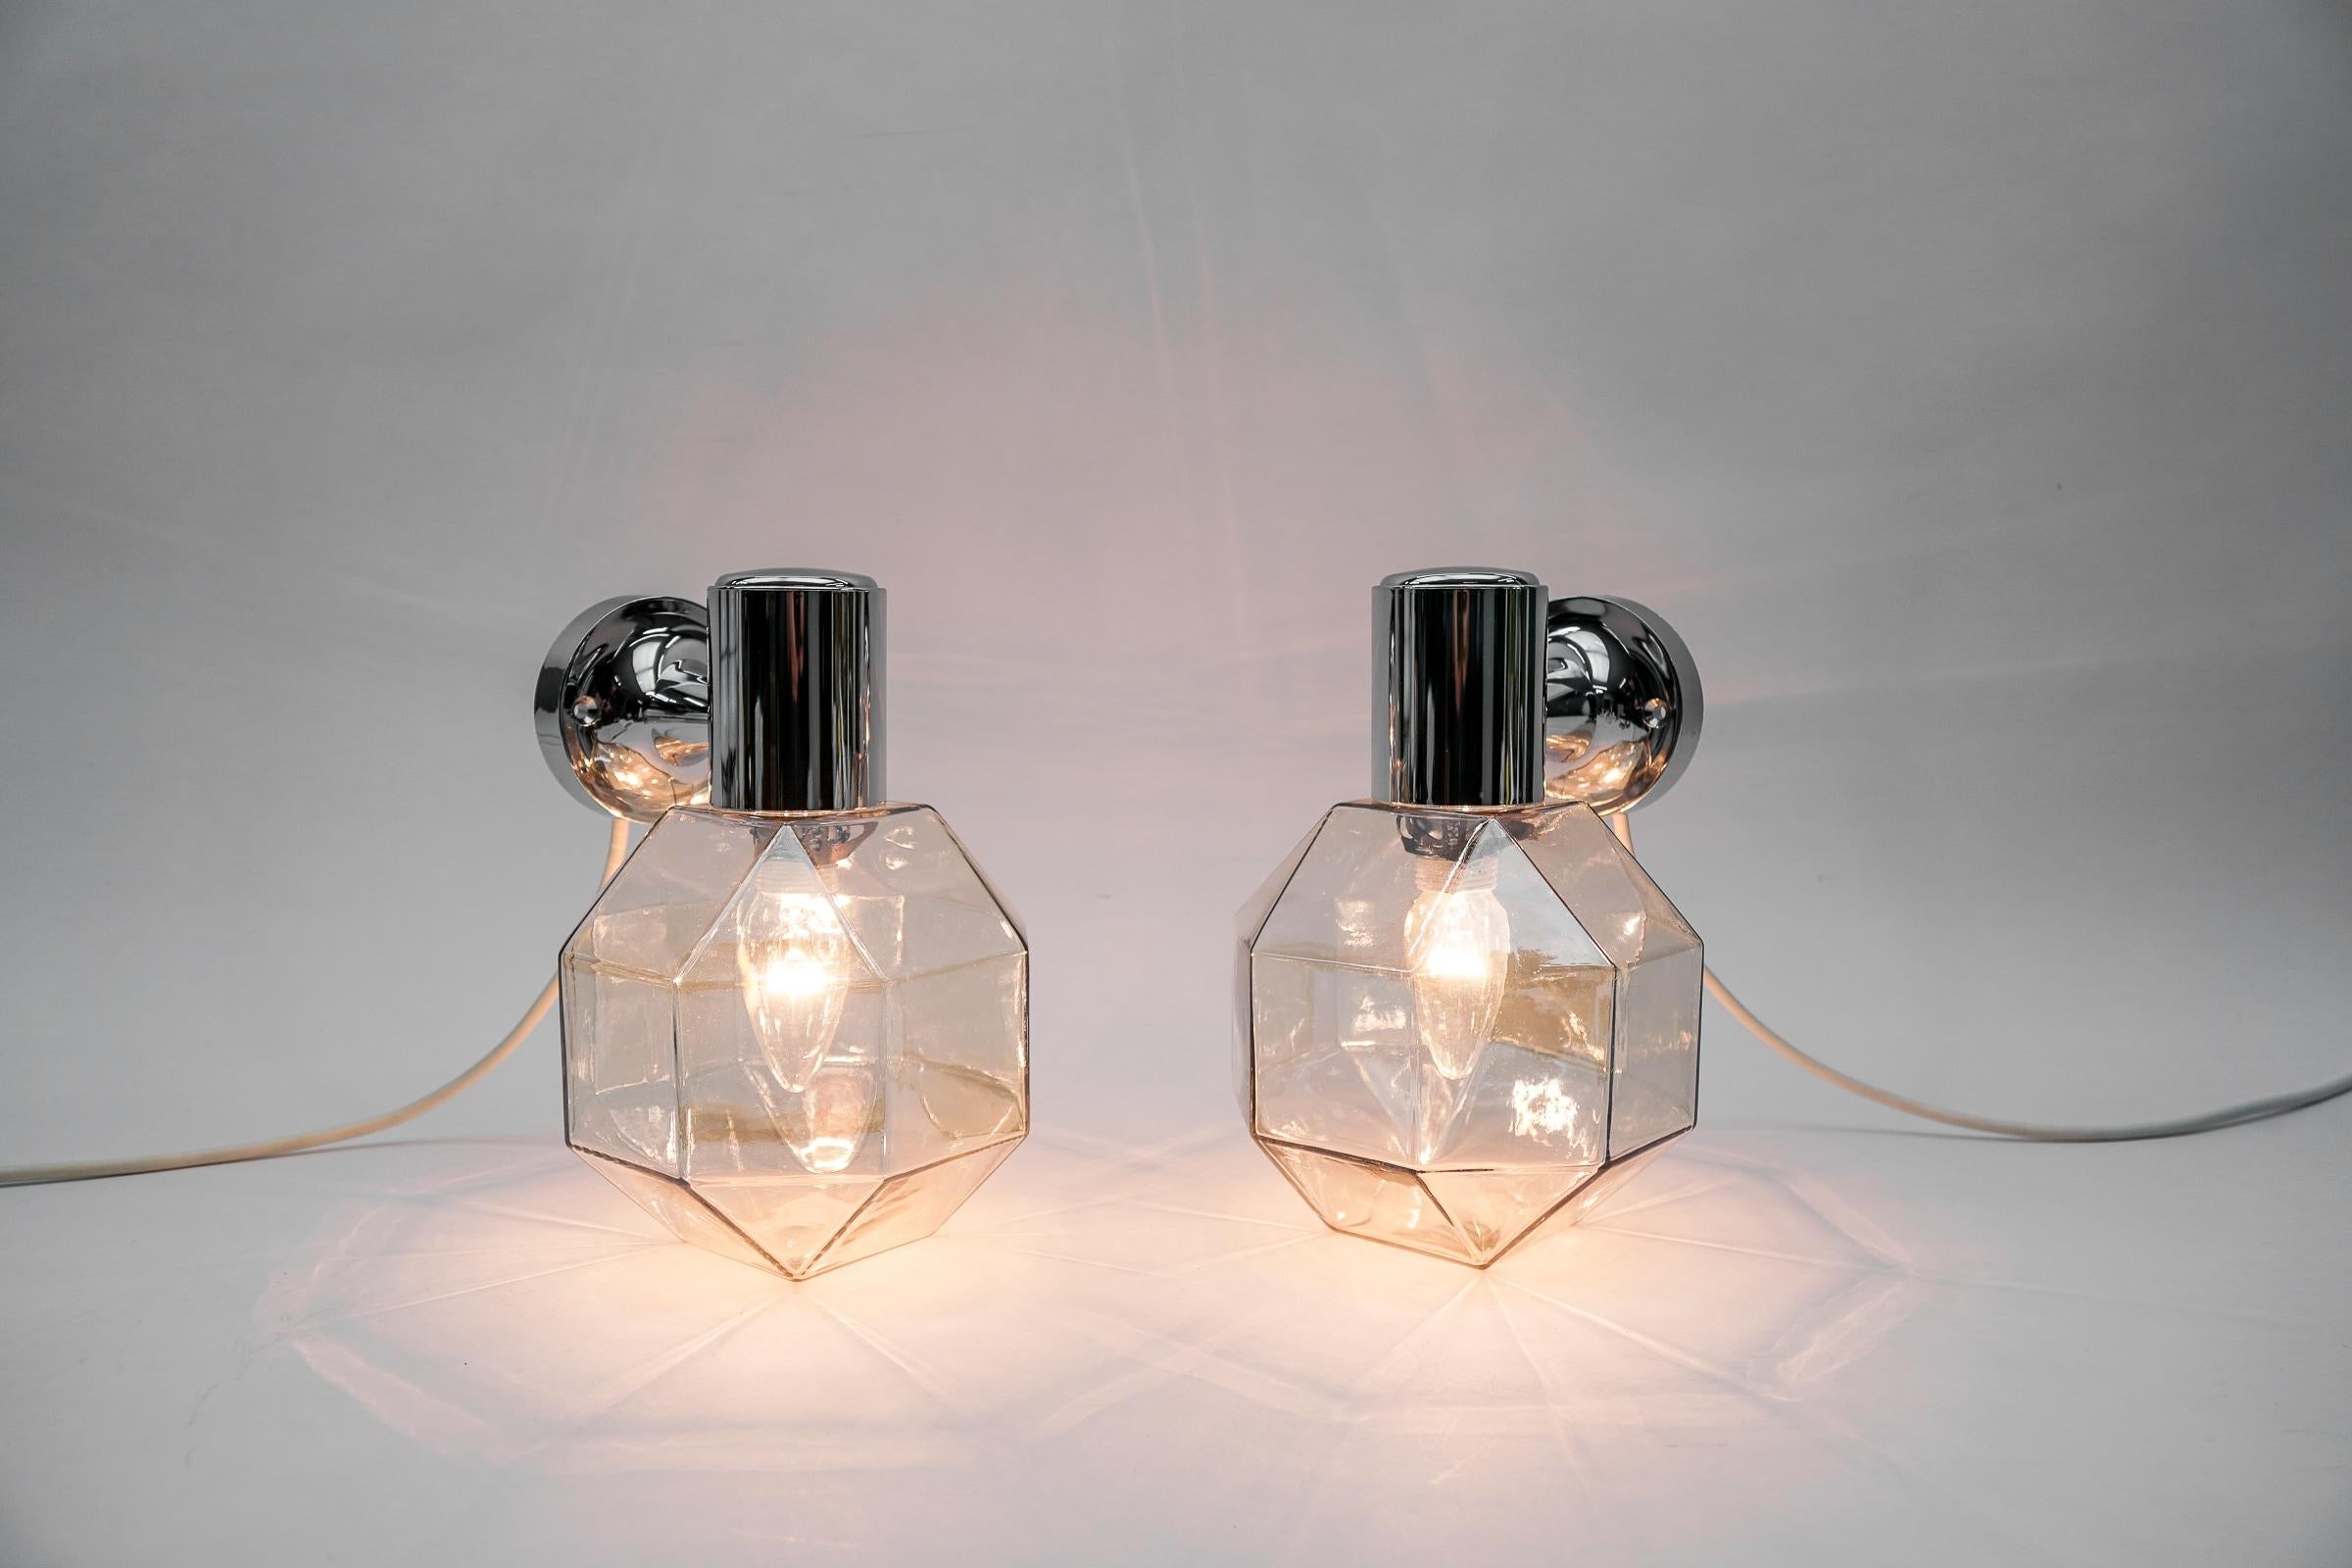 The great thing about these wall lamps are the ON-OFF switches underneath the glass shades, the round curved knob which is almost the WHOLE size of the bottom part of the lamp. 

The pendant lamp comes with each 1 x E14 / E15 Edison screw fit bulb